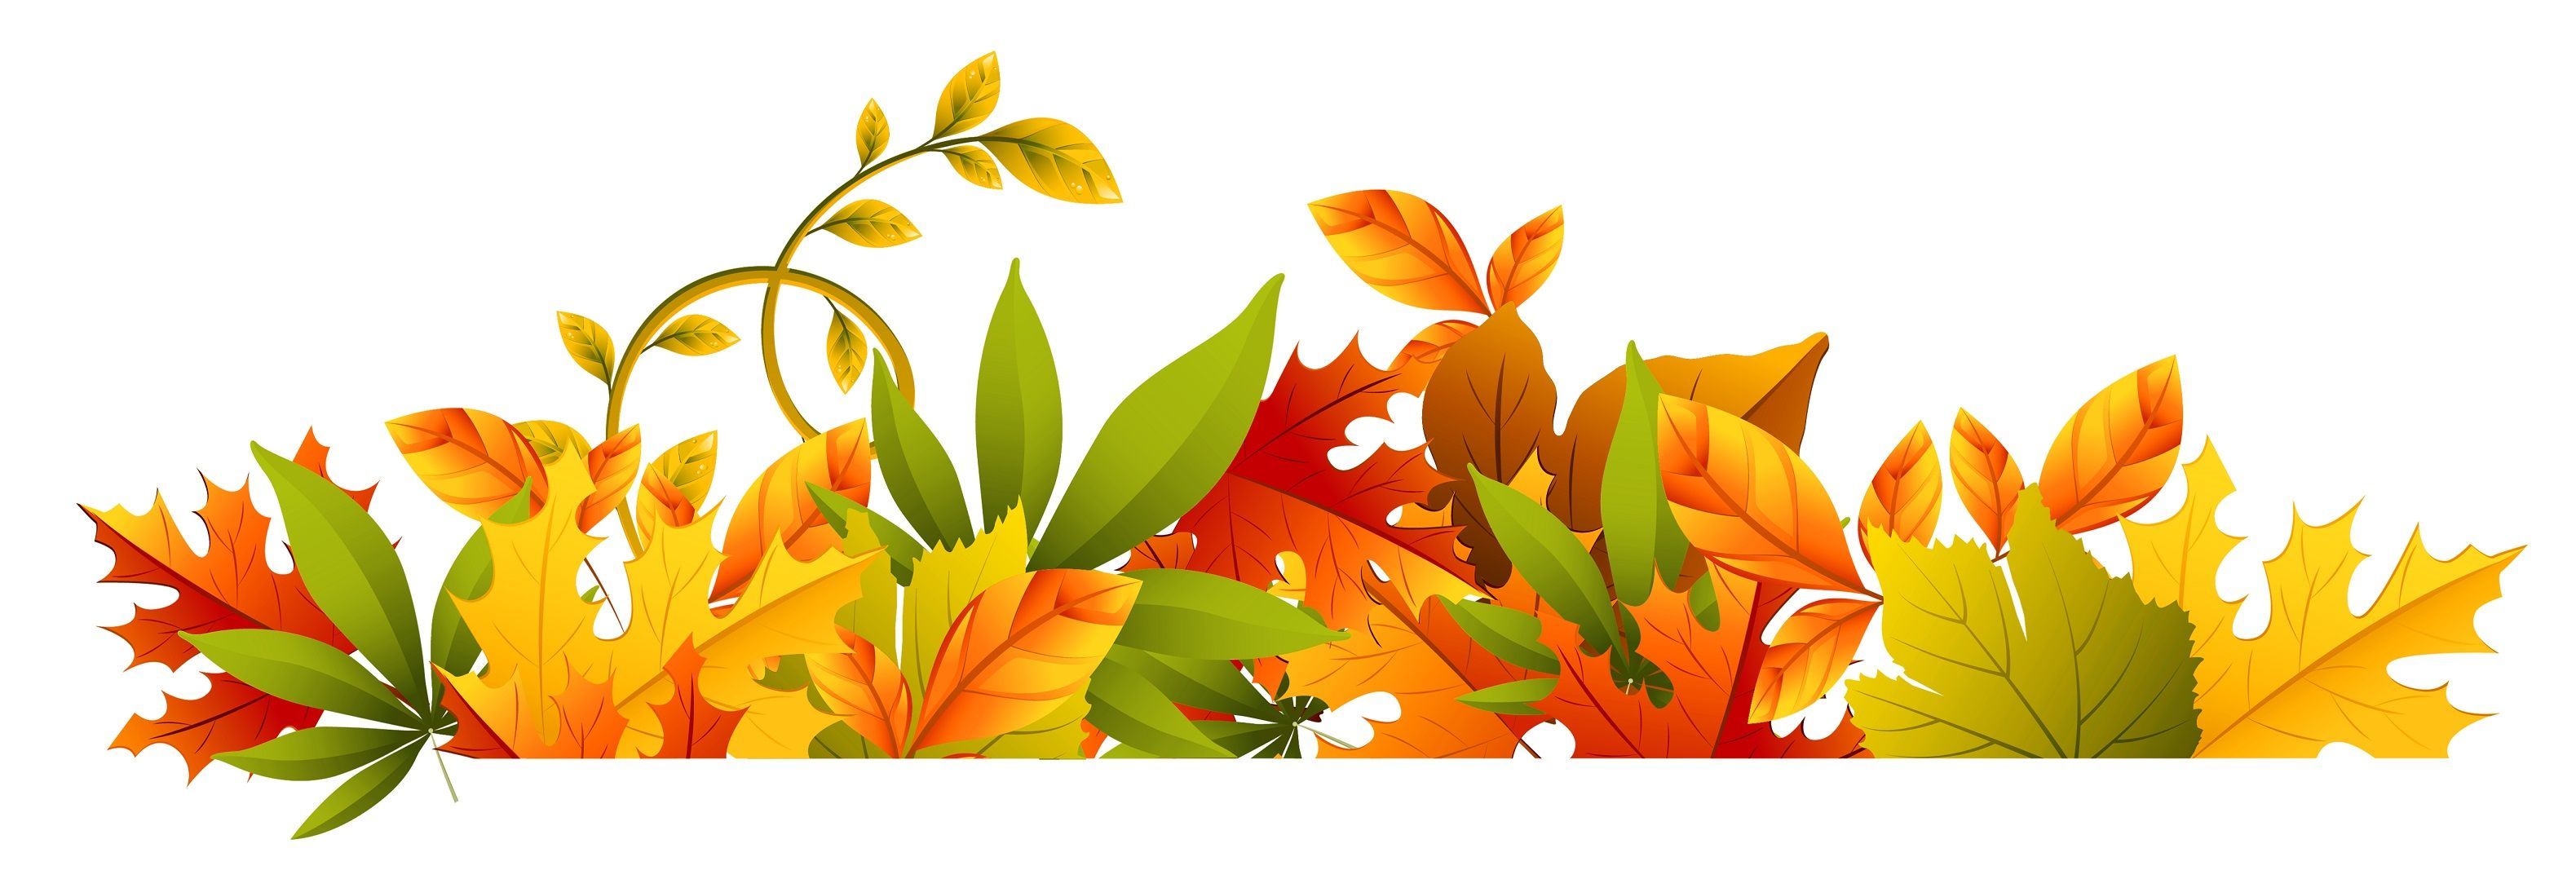 Fall leaves banner clipart 6 » Clipart Portal.